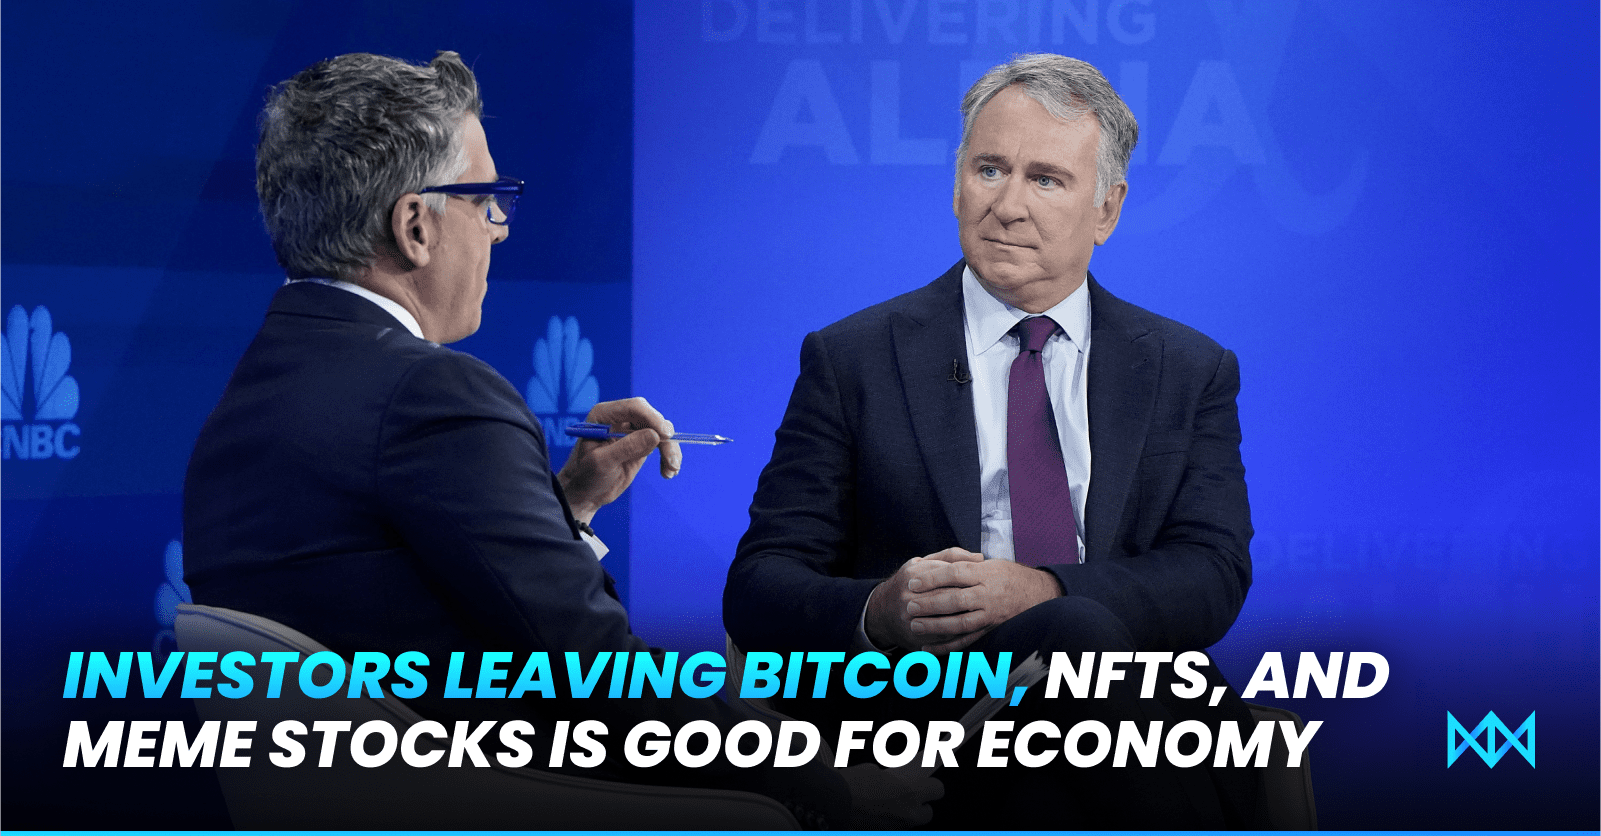 Citadel’s Ken Griffin: Investors Leaving Bitcoin, NFTs, and Meme Stocks Is Good for Economy